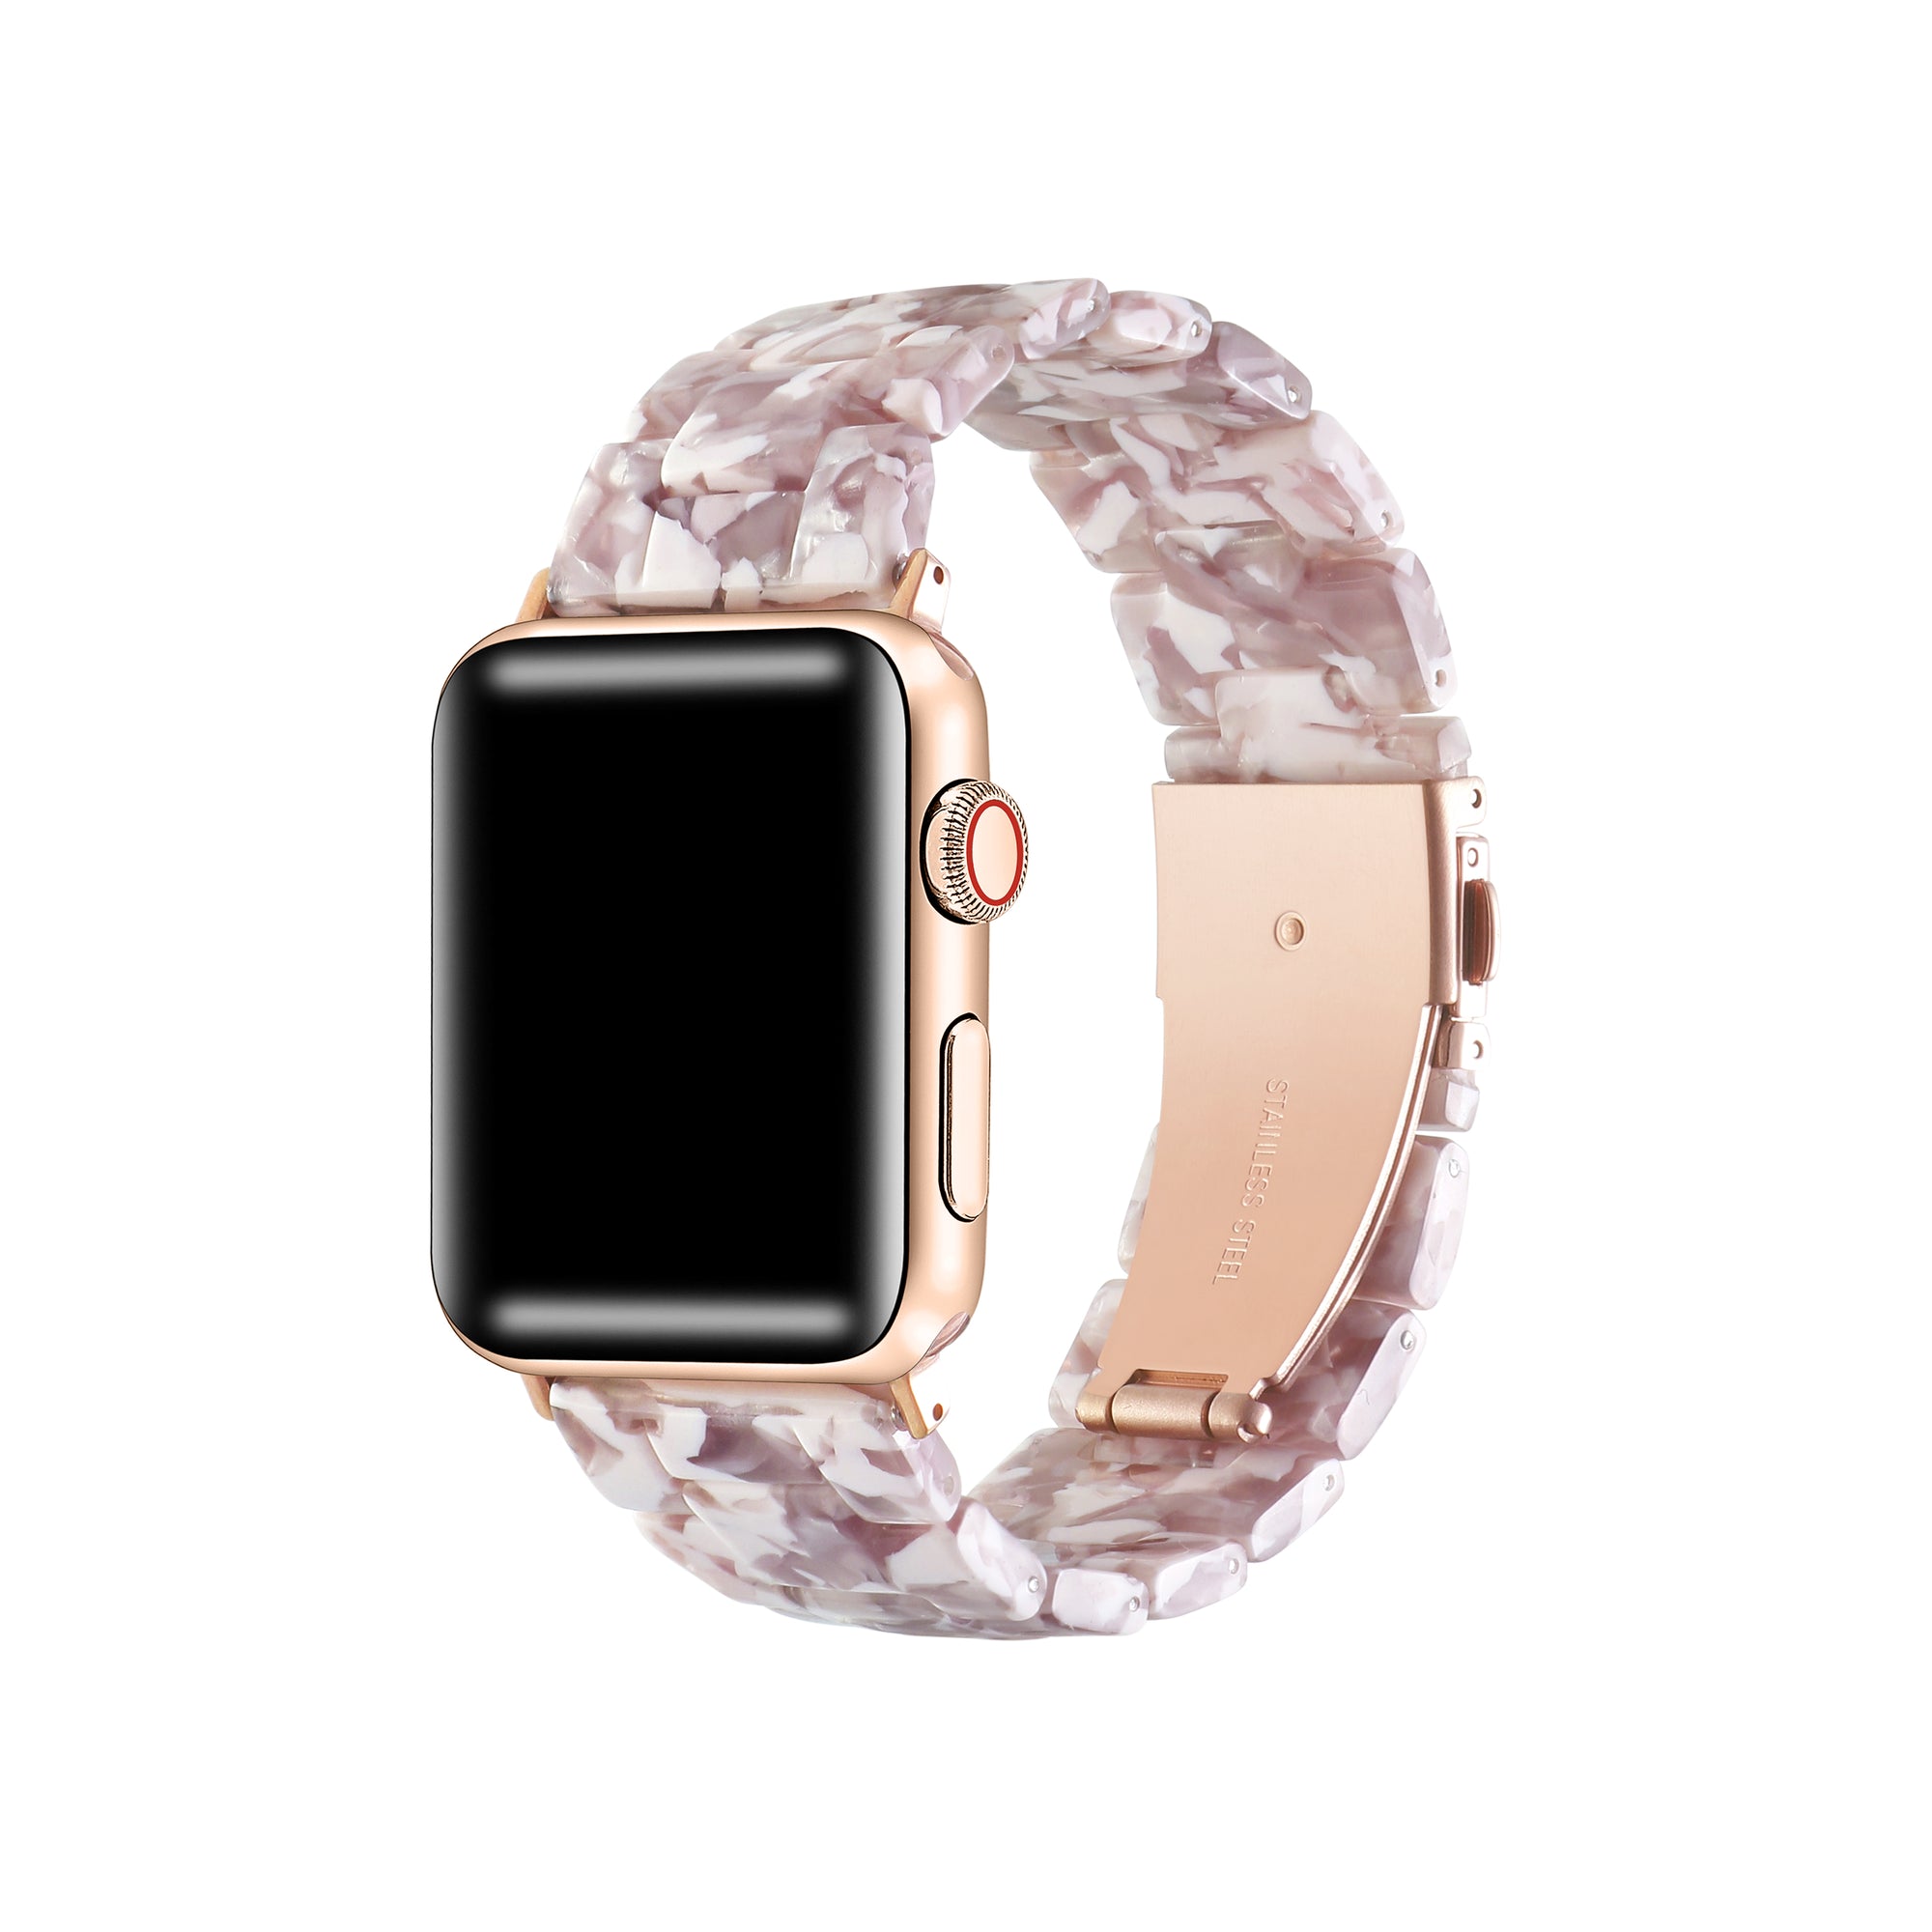 Claire Tortoise Resin Replacement Band for Apple Watch